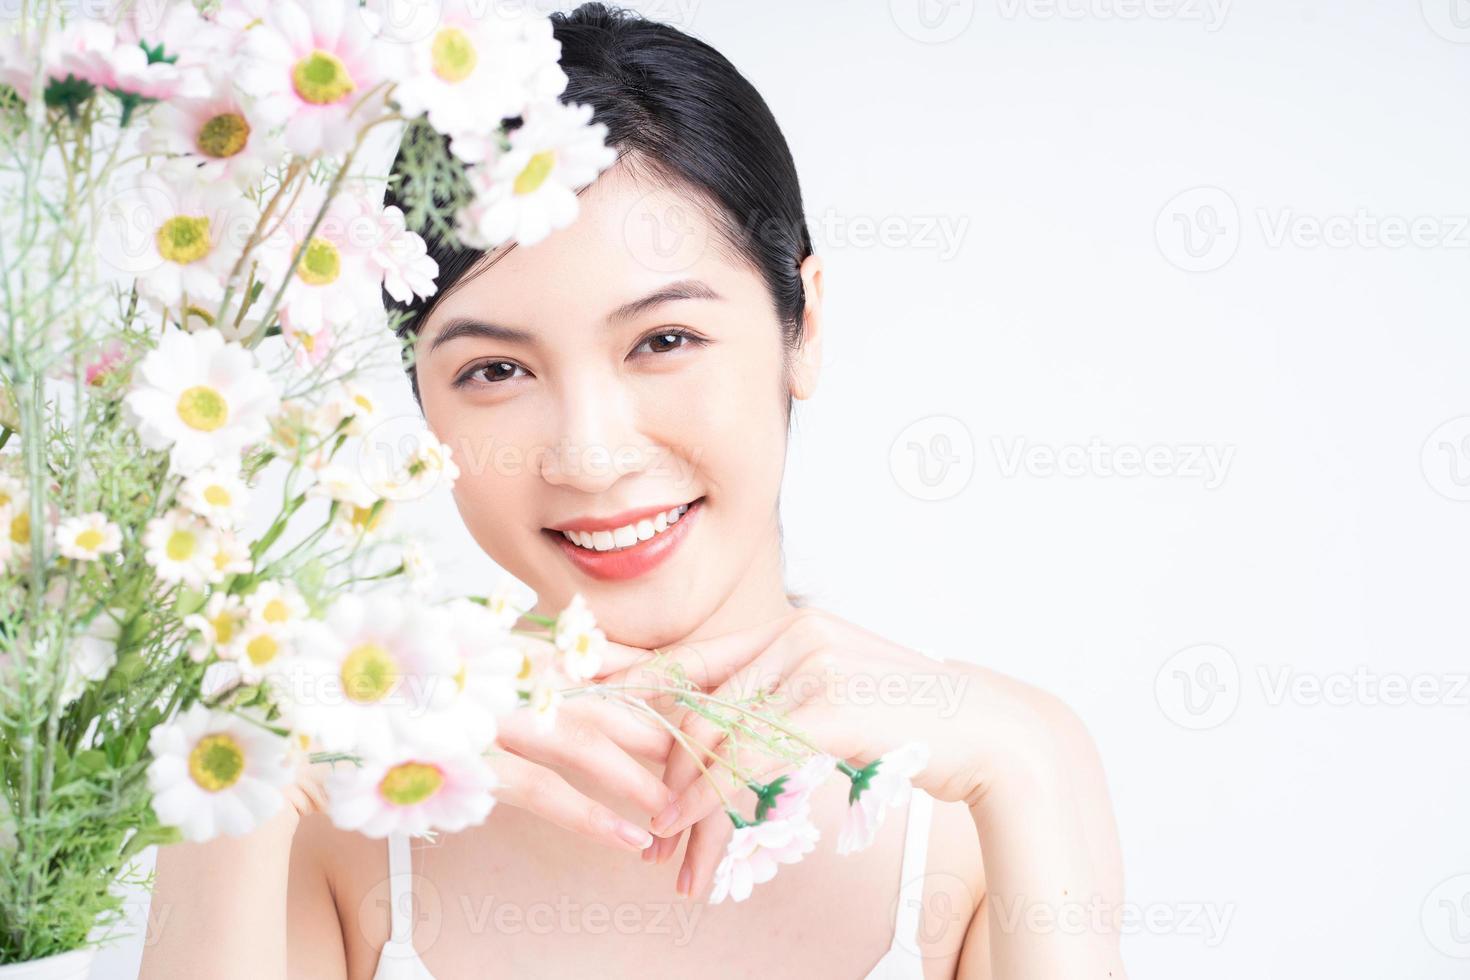 Beauty image of young Asian woman with flowers photo